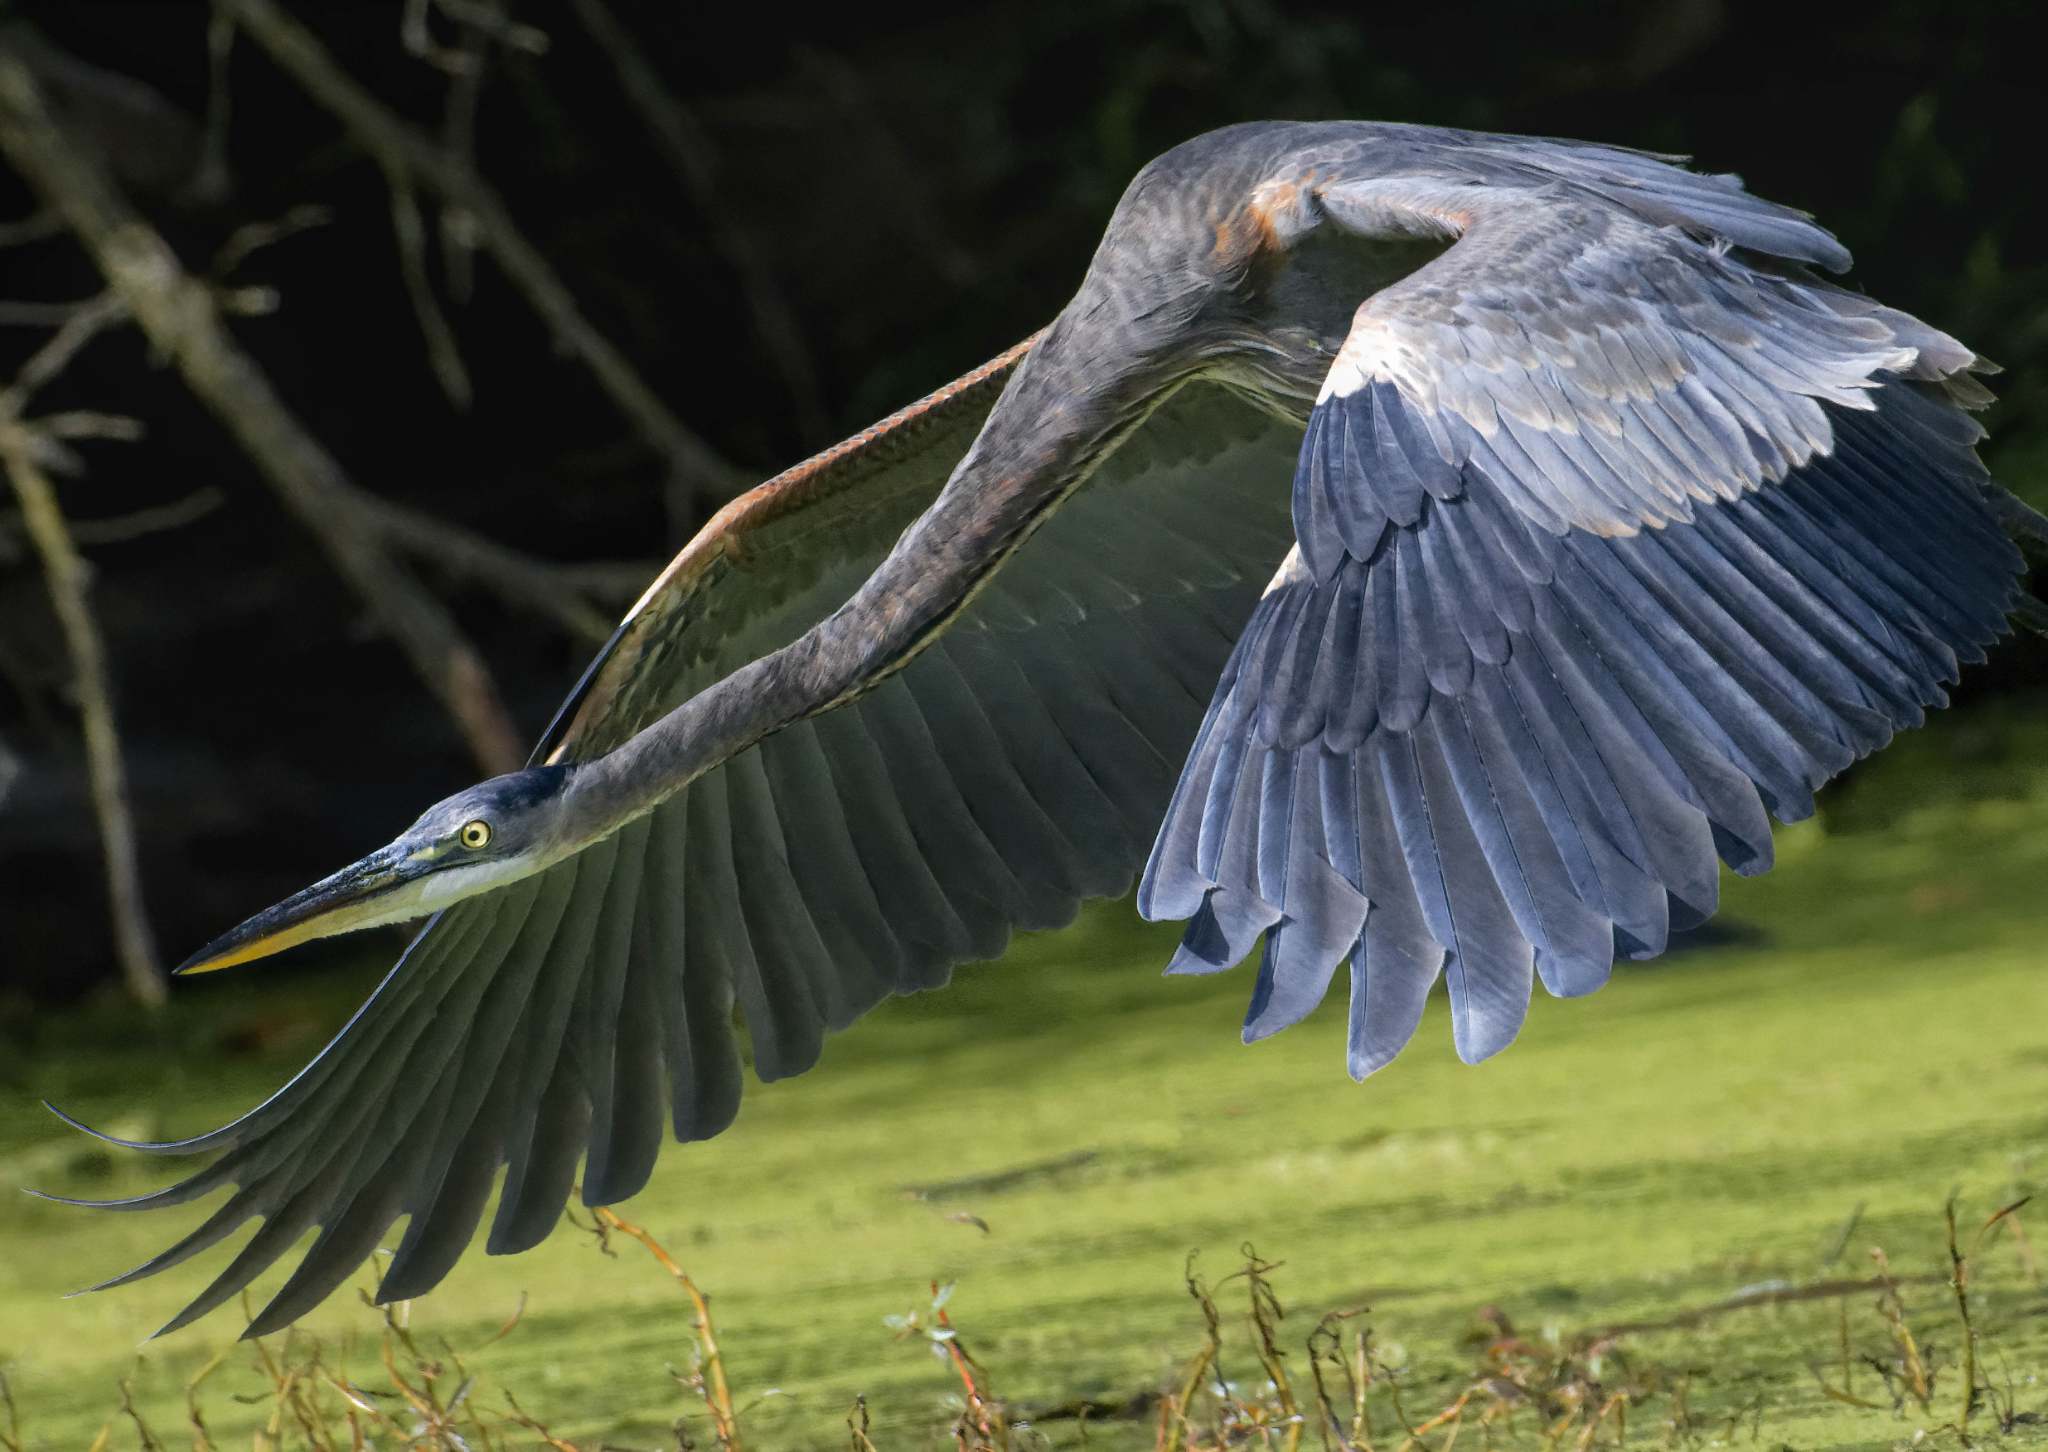 A great blue heron flying low over the water